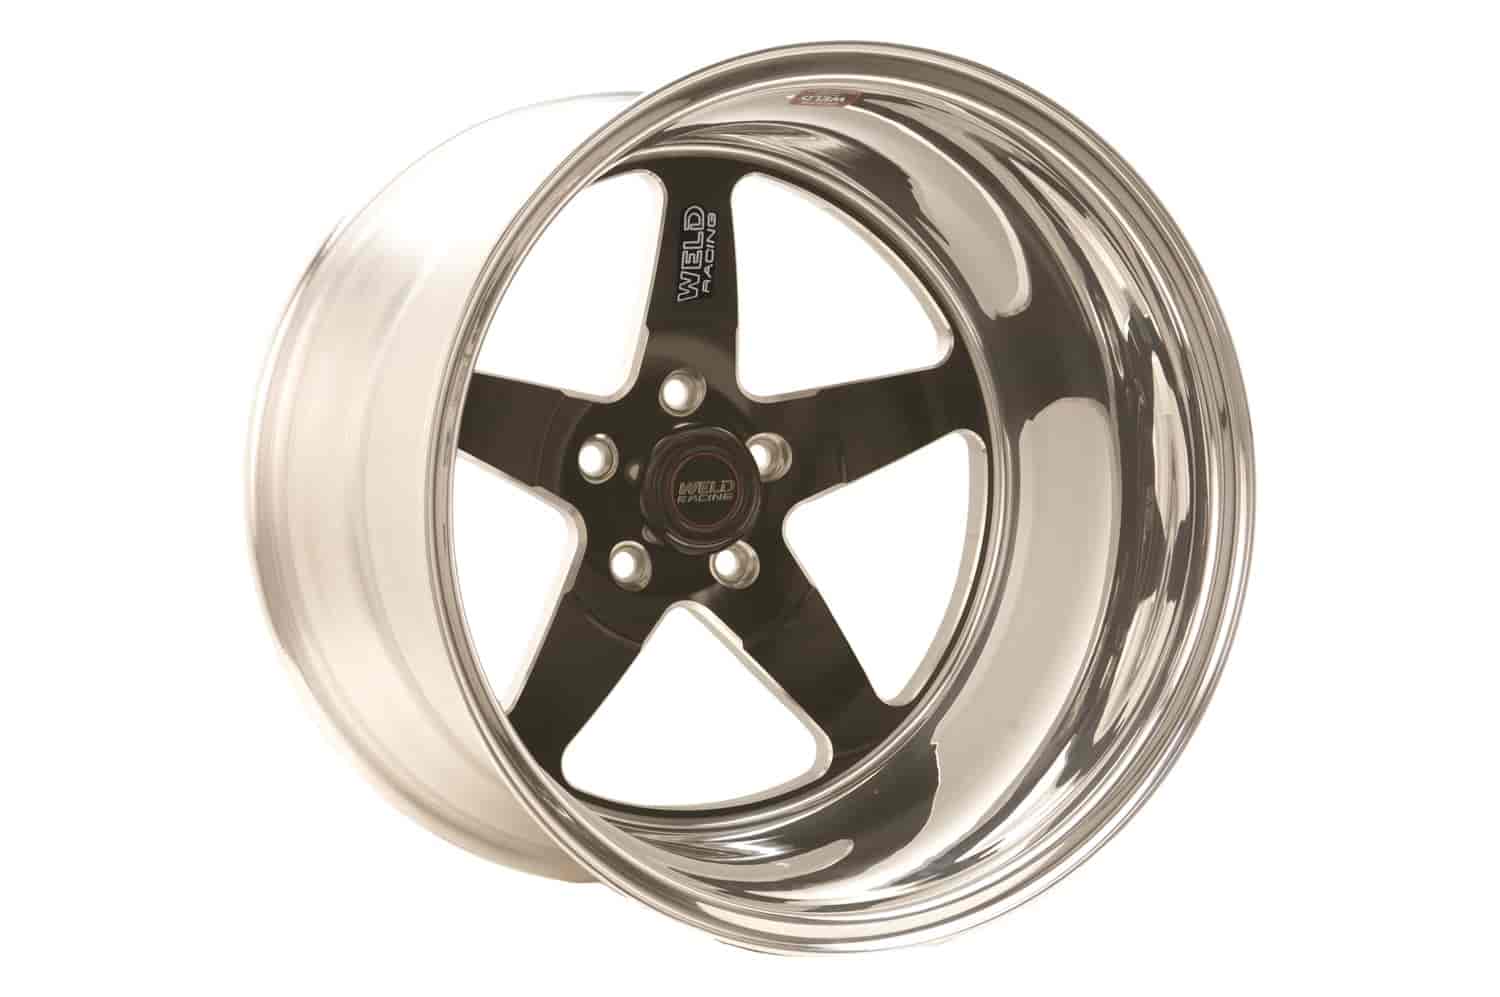 RT-S Series S71 Wheel Size: 15" x 8" Bolt Circle: 5 x 4-1/2" Back Space: 4-1/2"